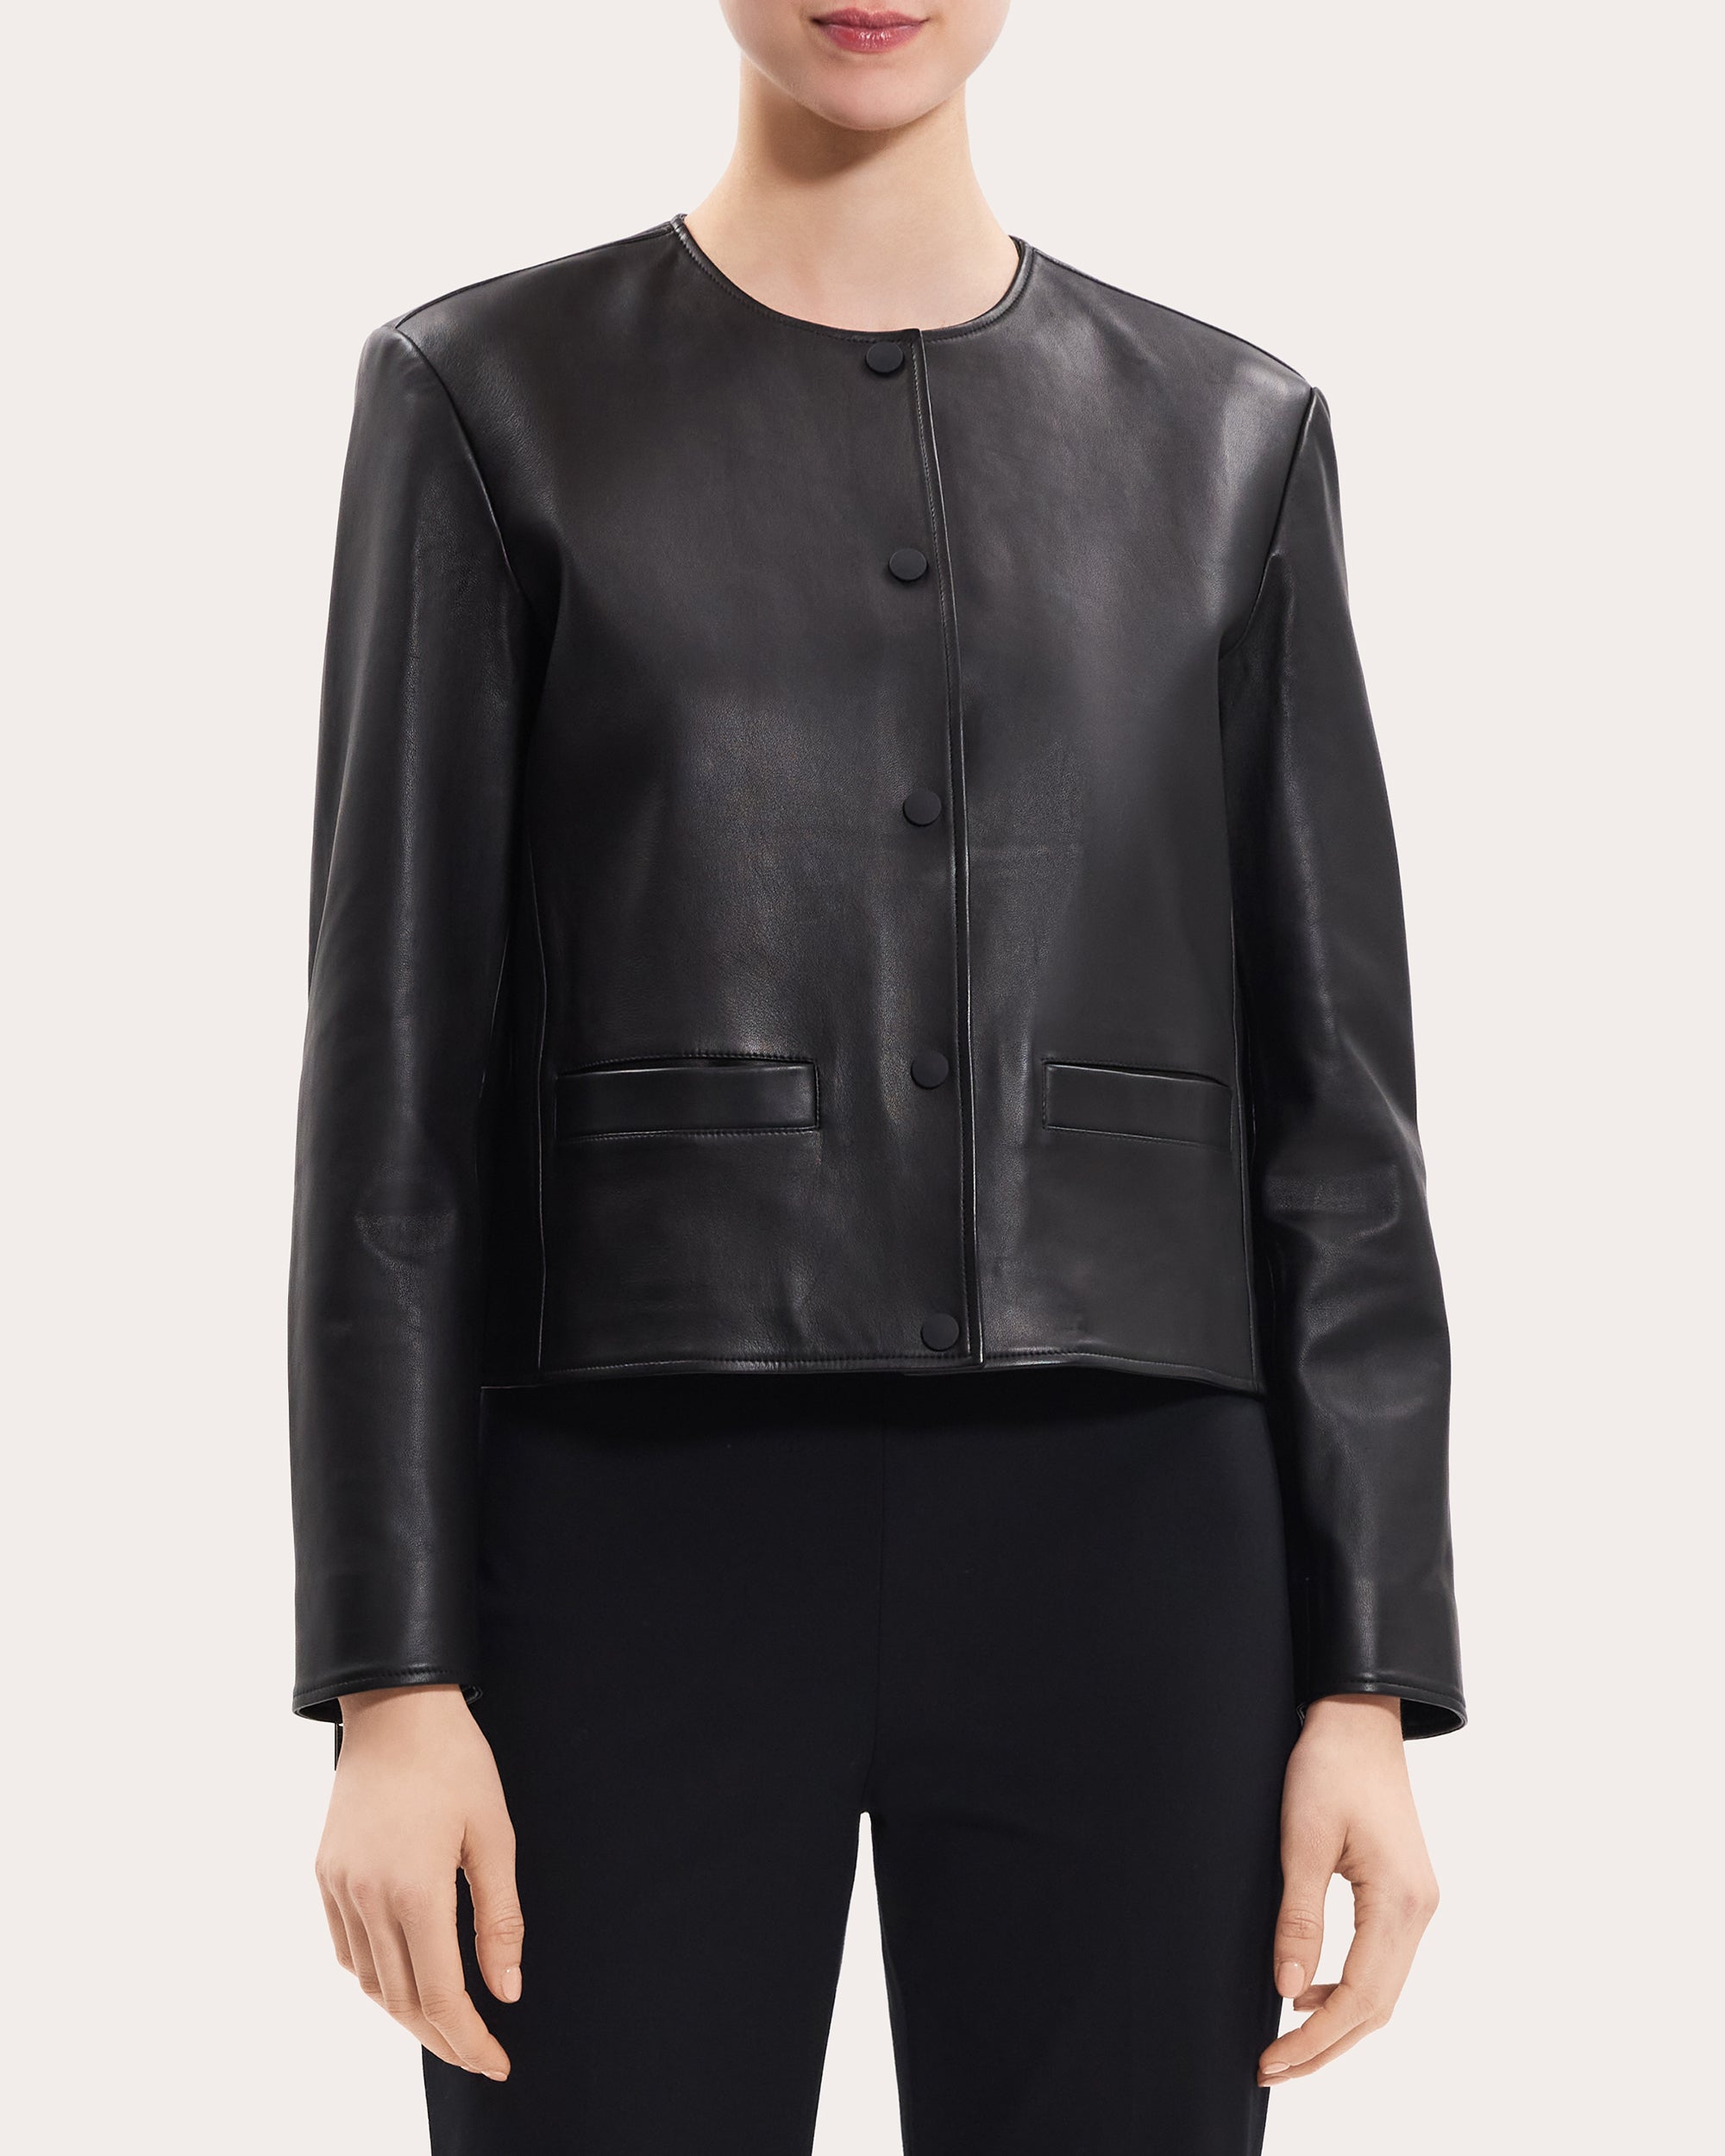 THEORY WOMEN'S CROPPED LEATHER JACKET